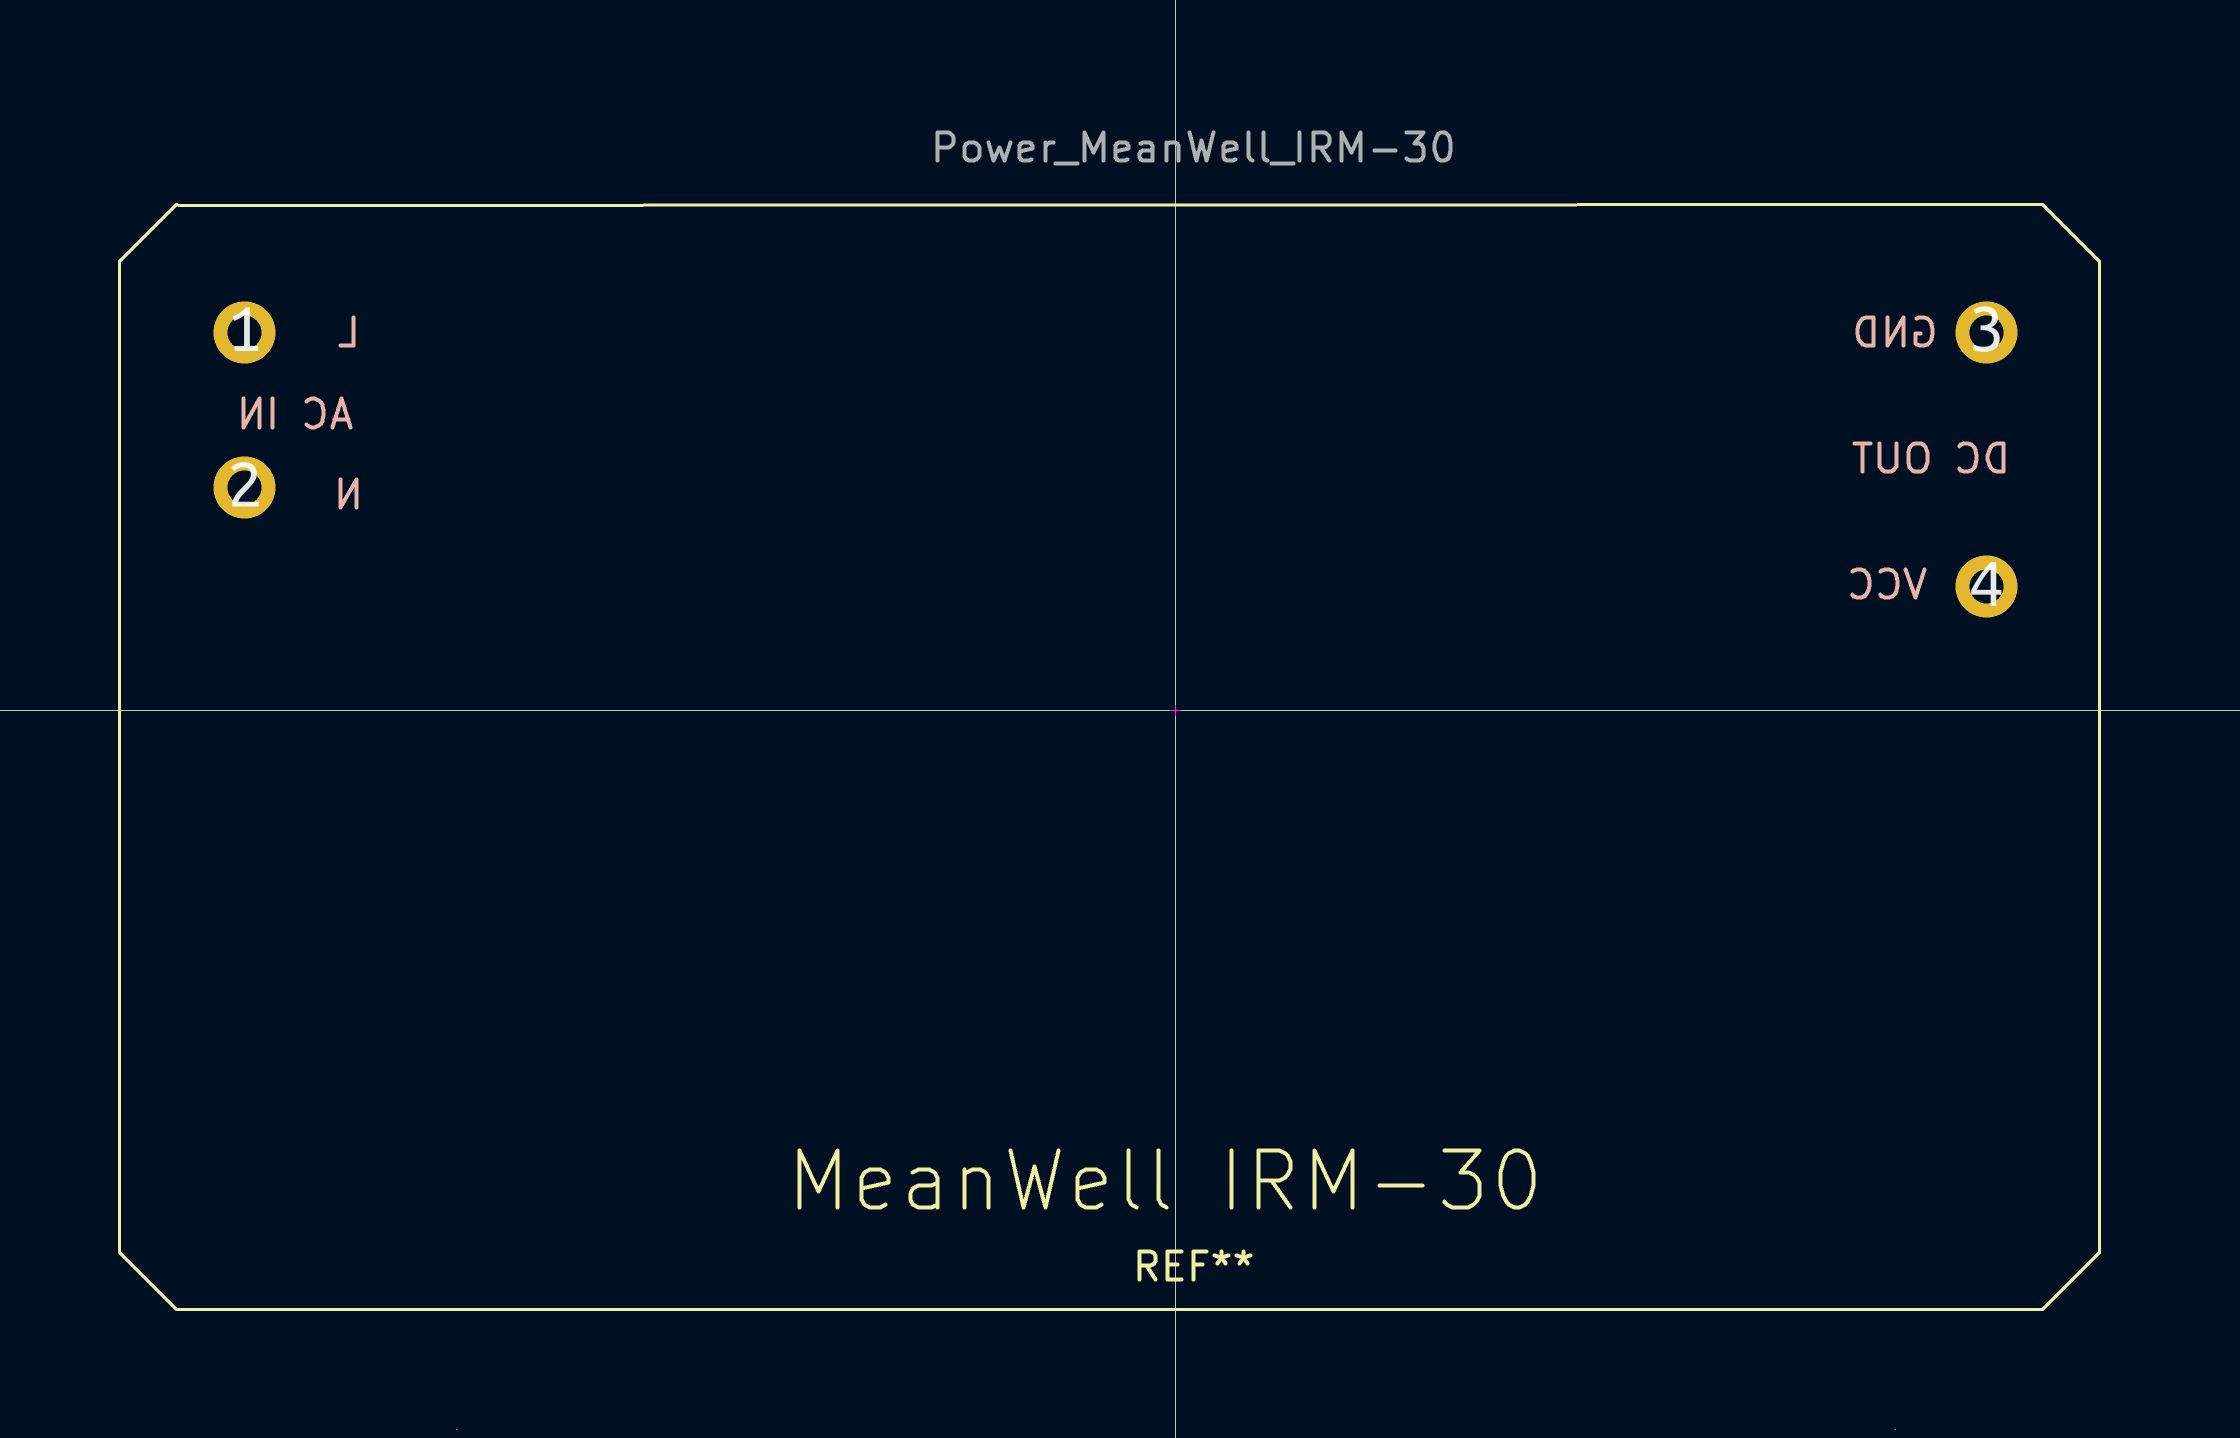 Power_MeanWell_IRM-30 03